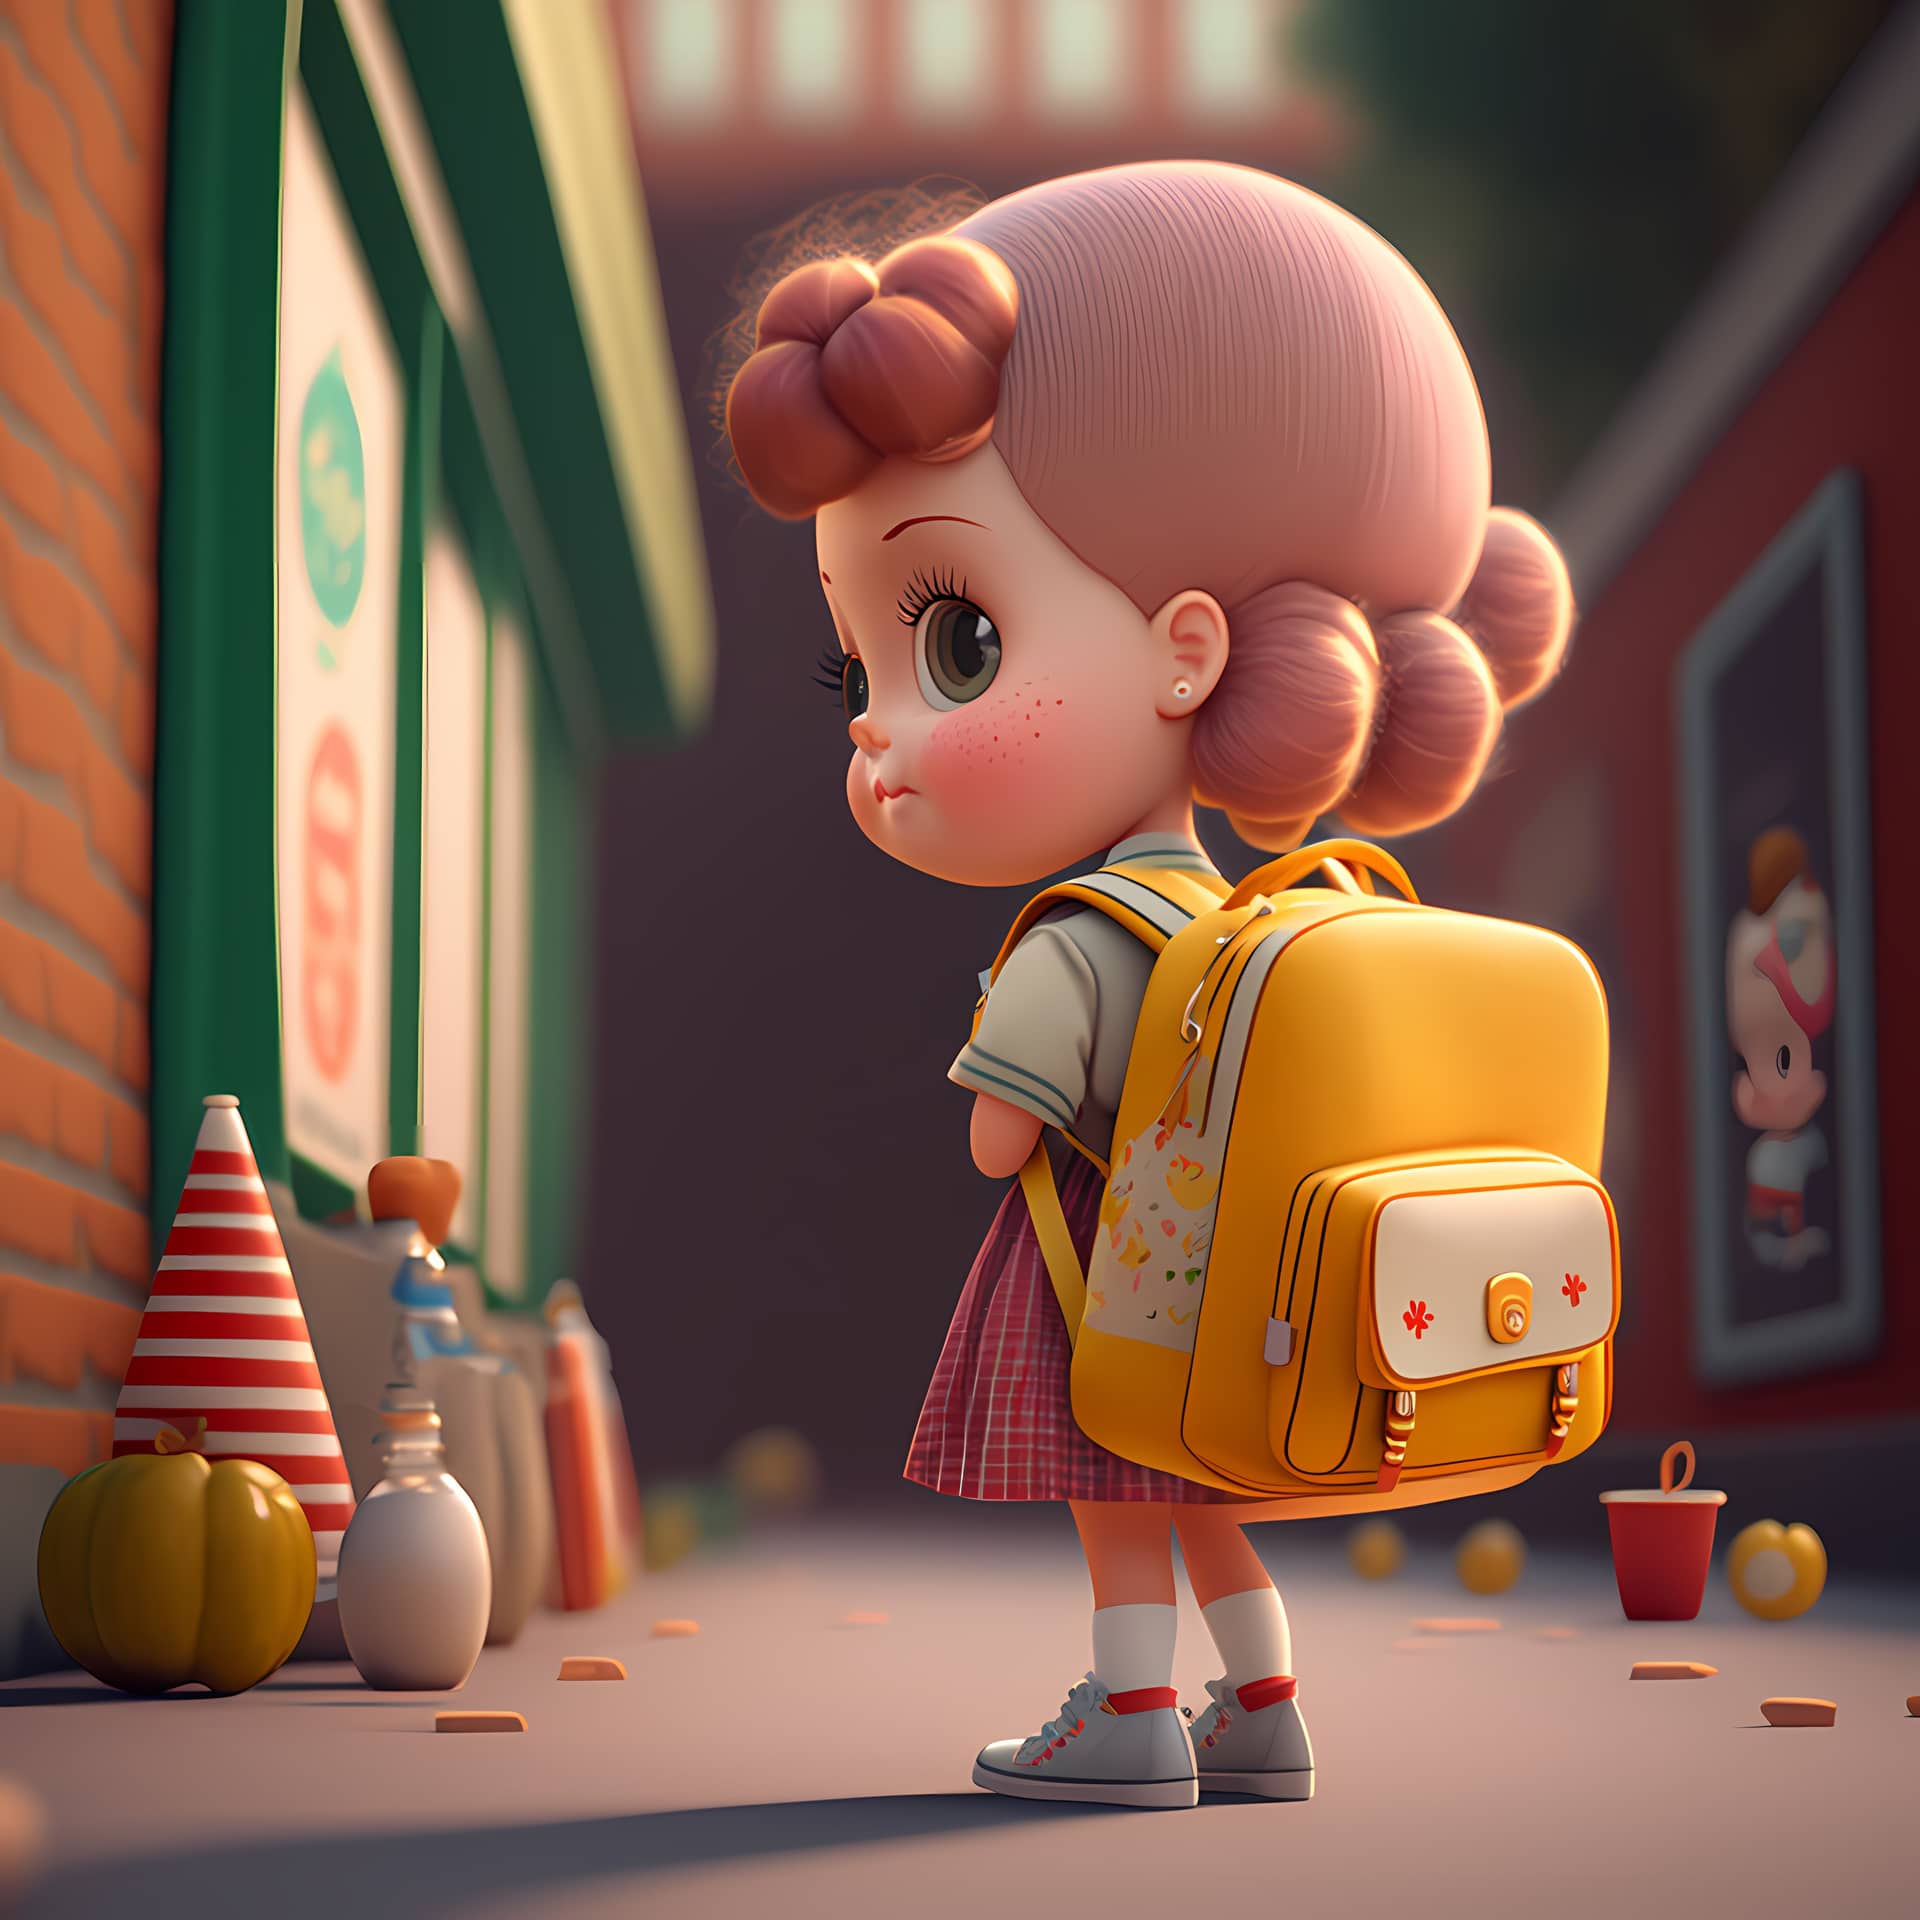 Adorable cute kid girls with school background 3d illustration image